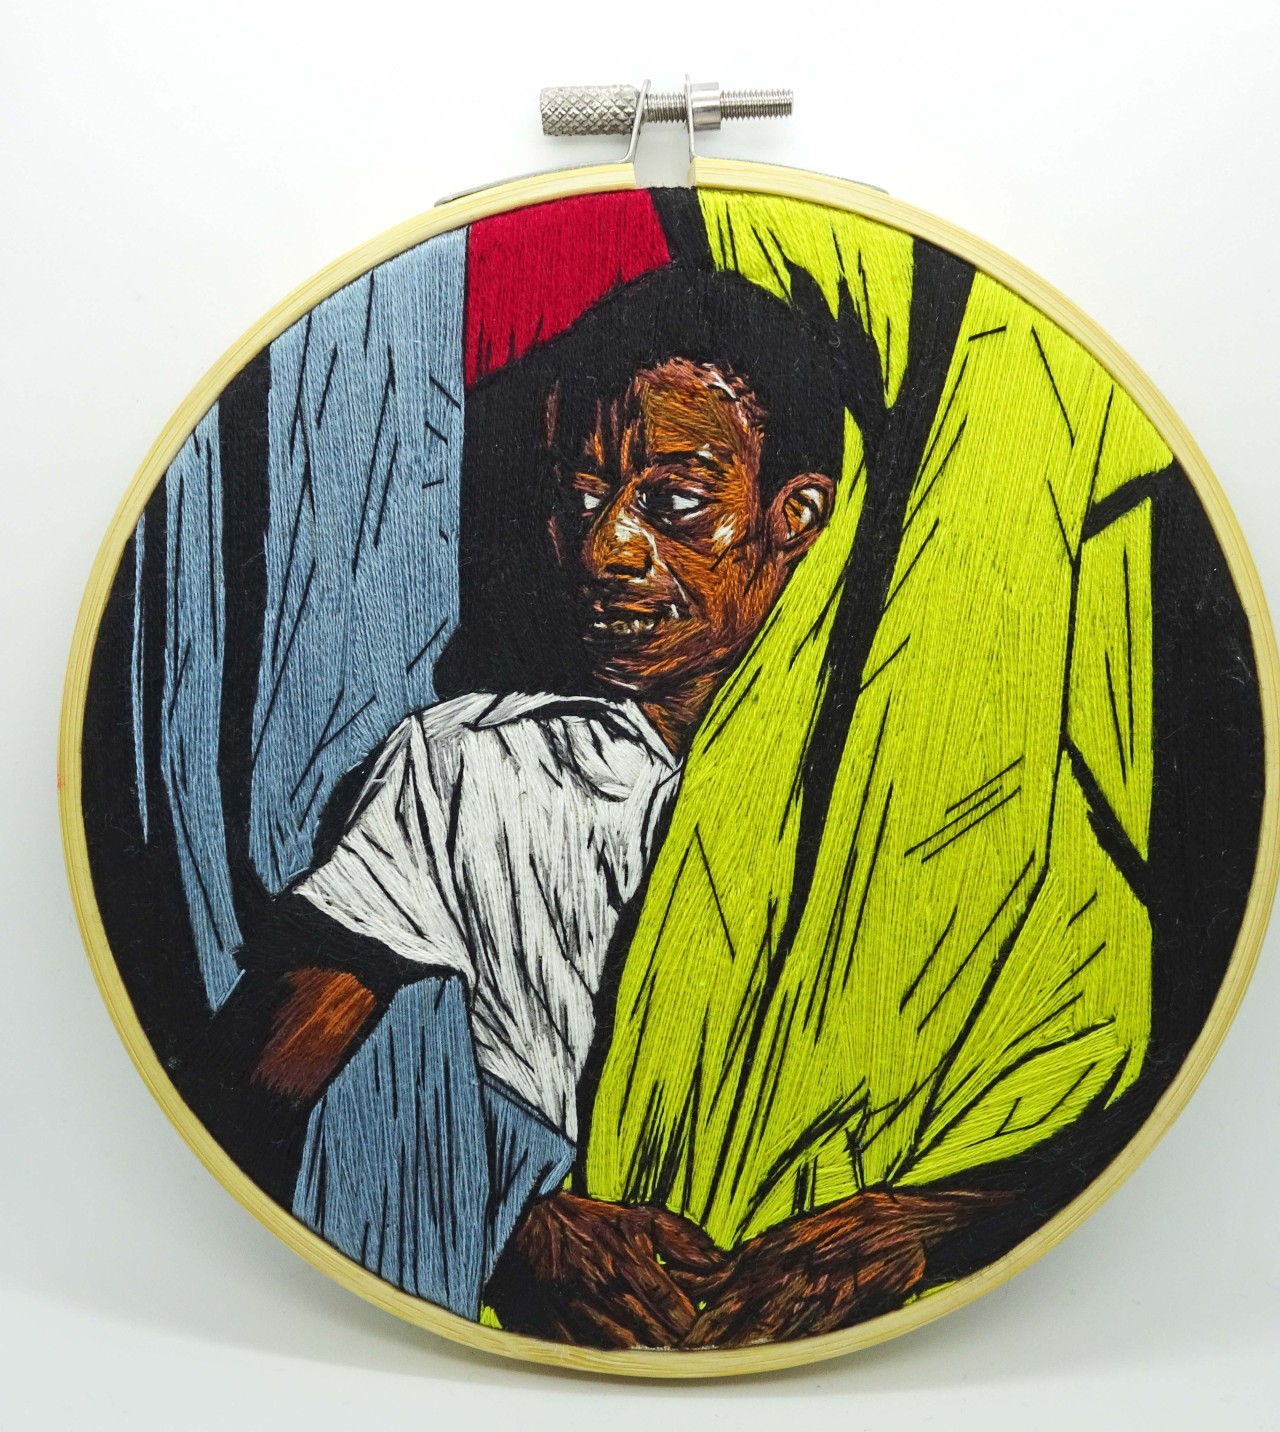 thevampireswife:
“My embroidery tribute to the beautiful visionary James Baldwin
”